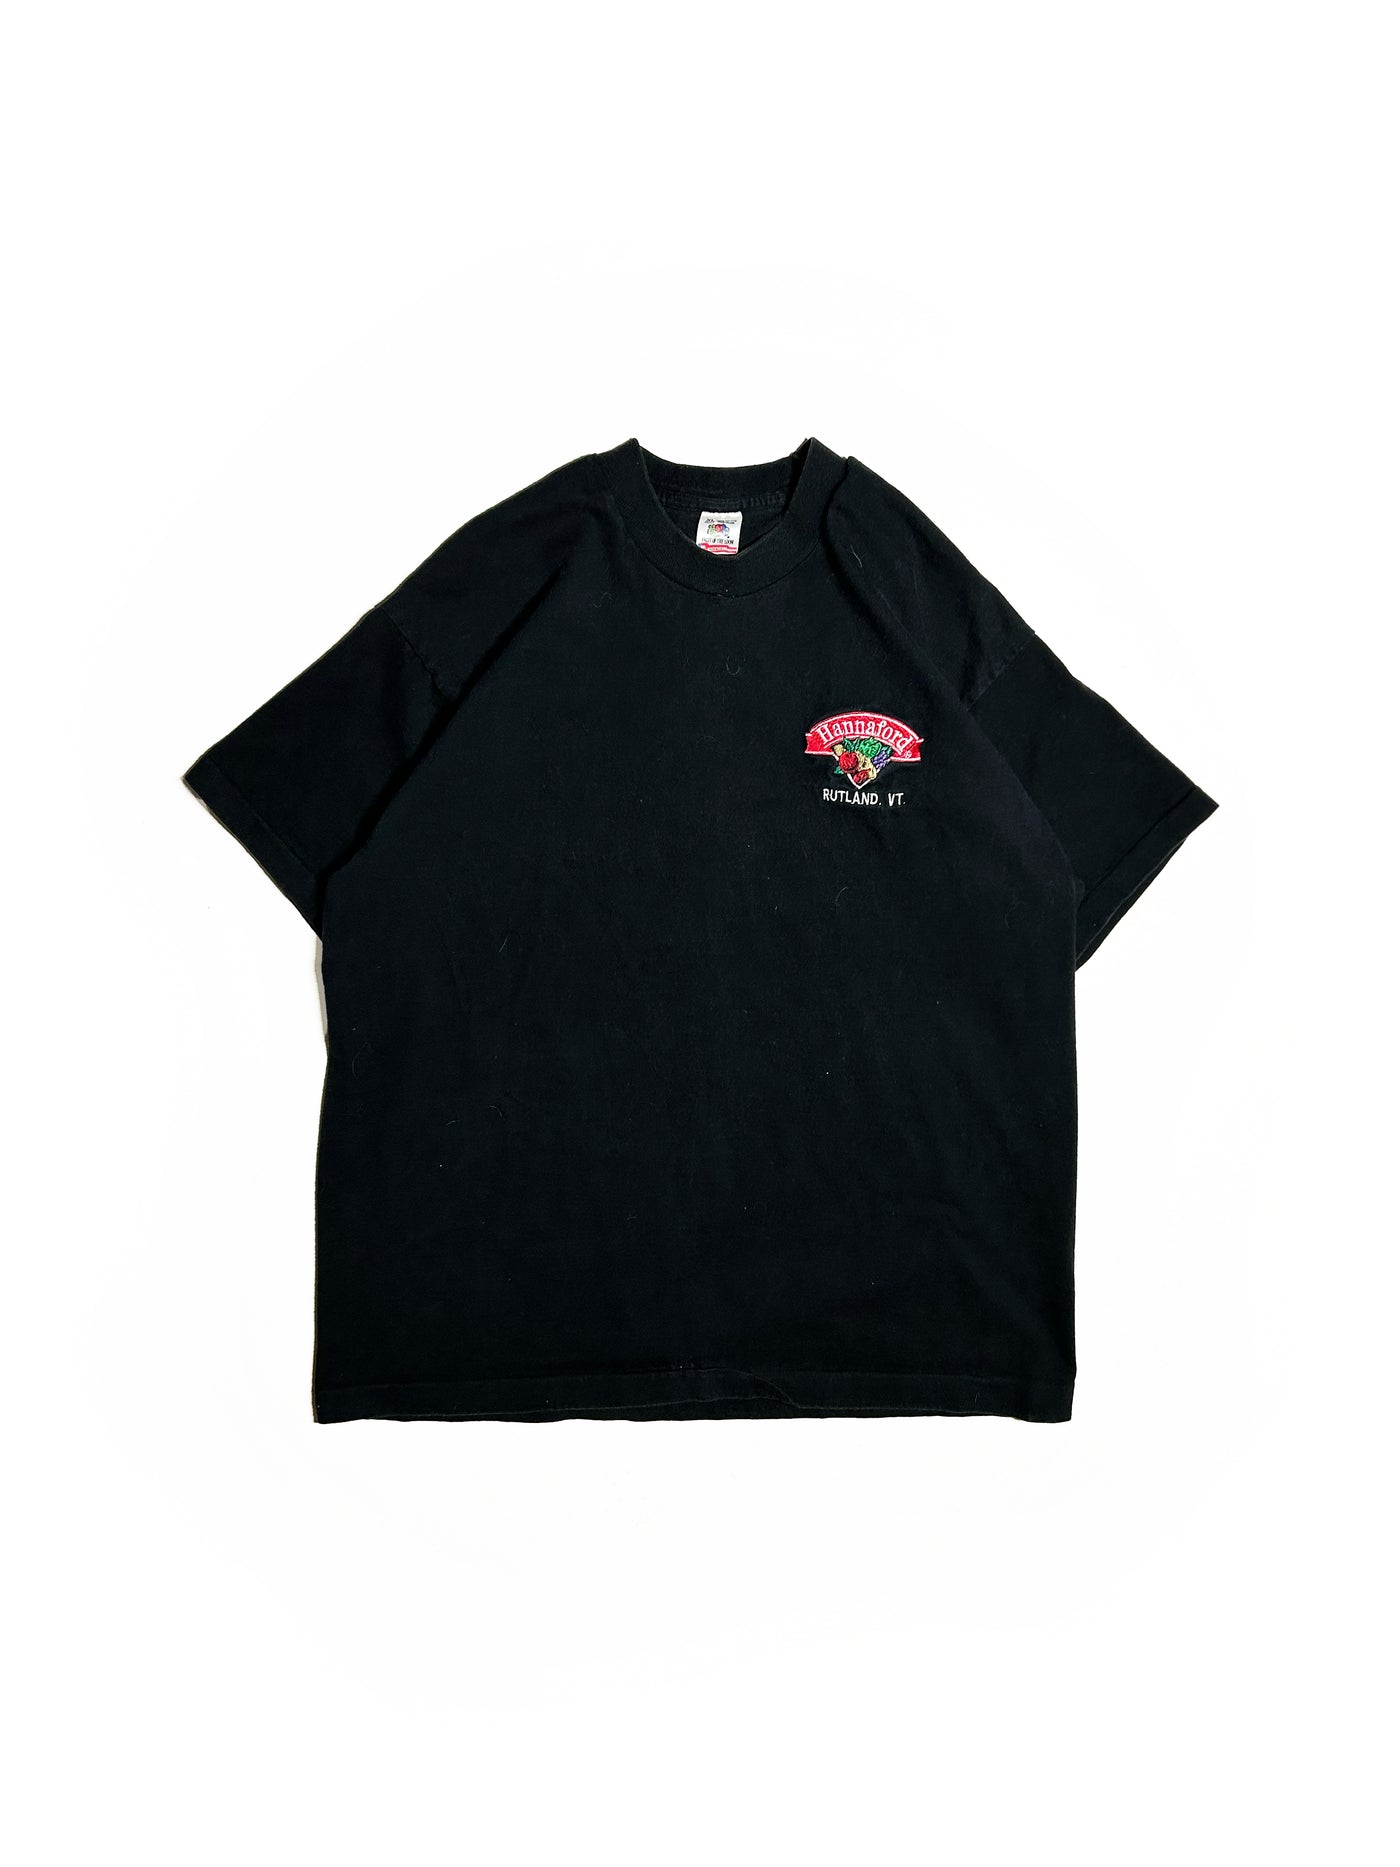 Vintage 90s Embroidered Hannaford T-Shirt